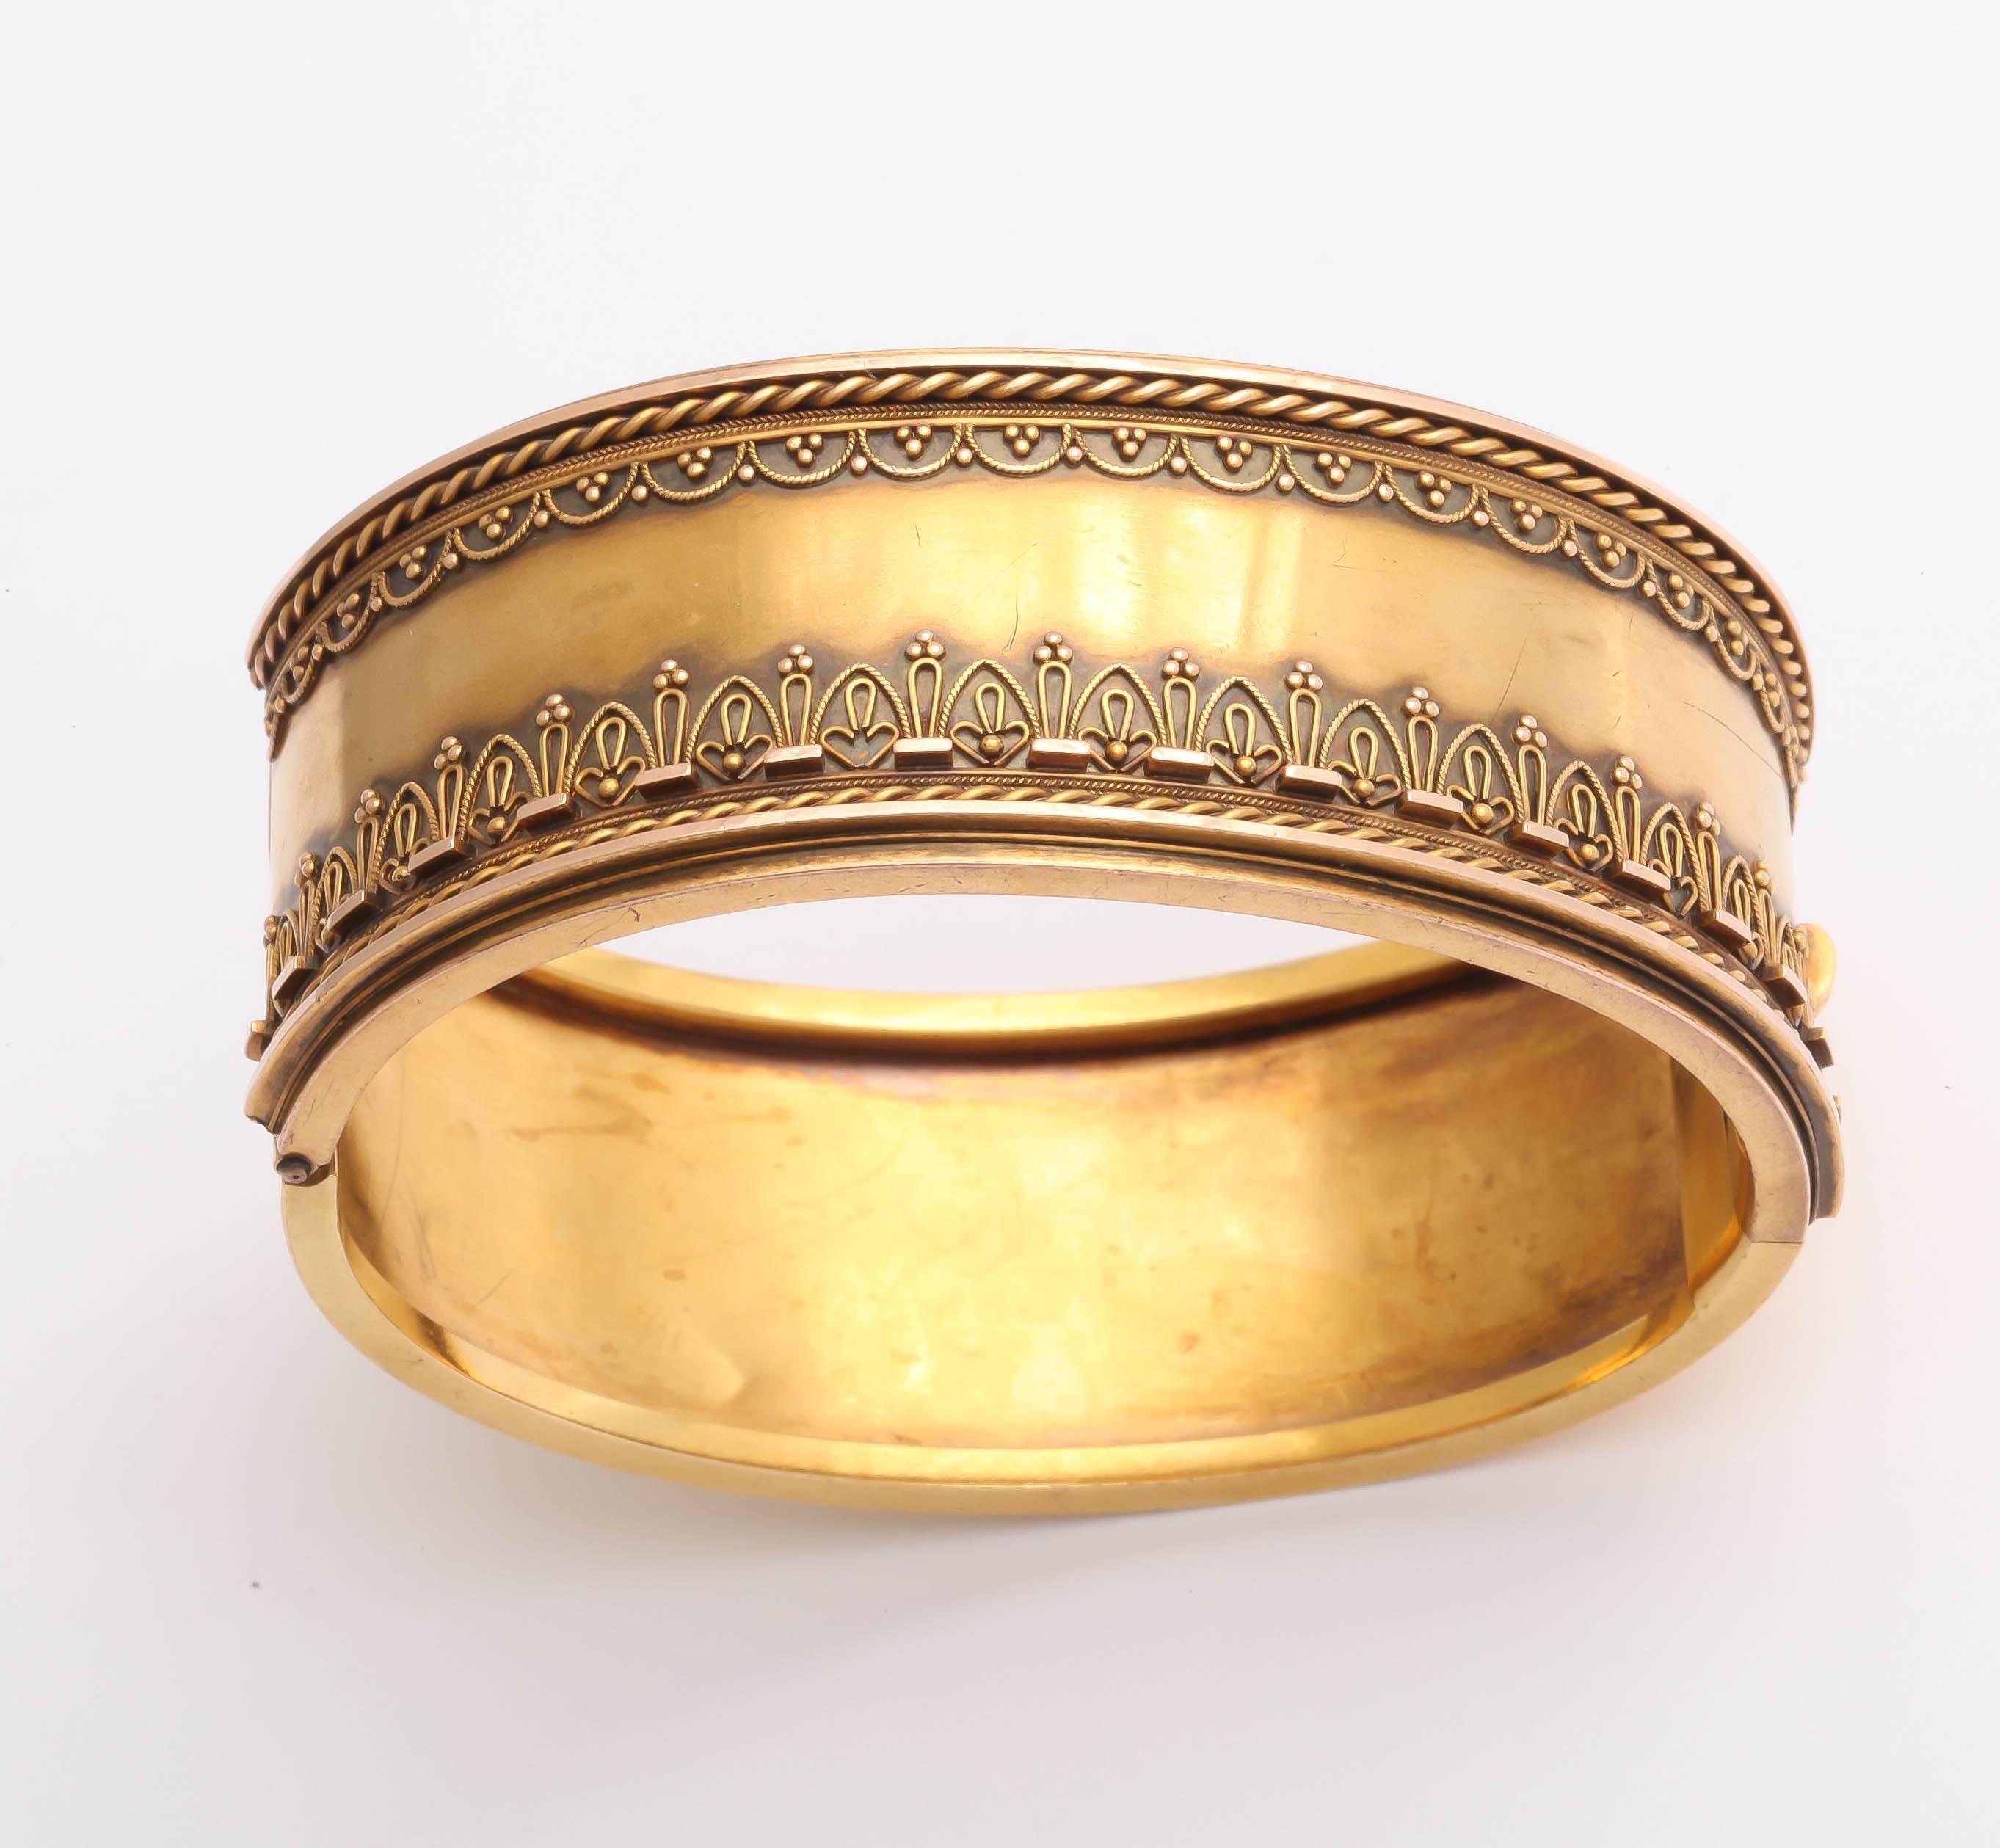 15K English bracelet in the Etruscan Revival style popular during the Victorian era. The front of the bracelet is designed with coiled wires at the top and bottom as well as intricate wire and bead work. An easily wearable, classic Victorian piece. 